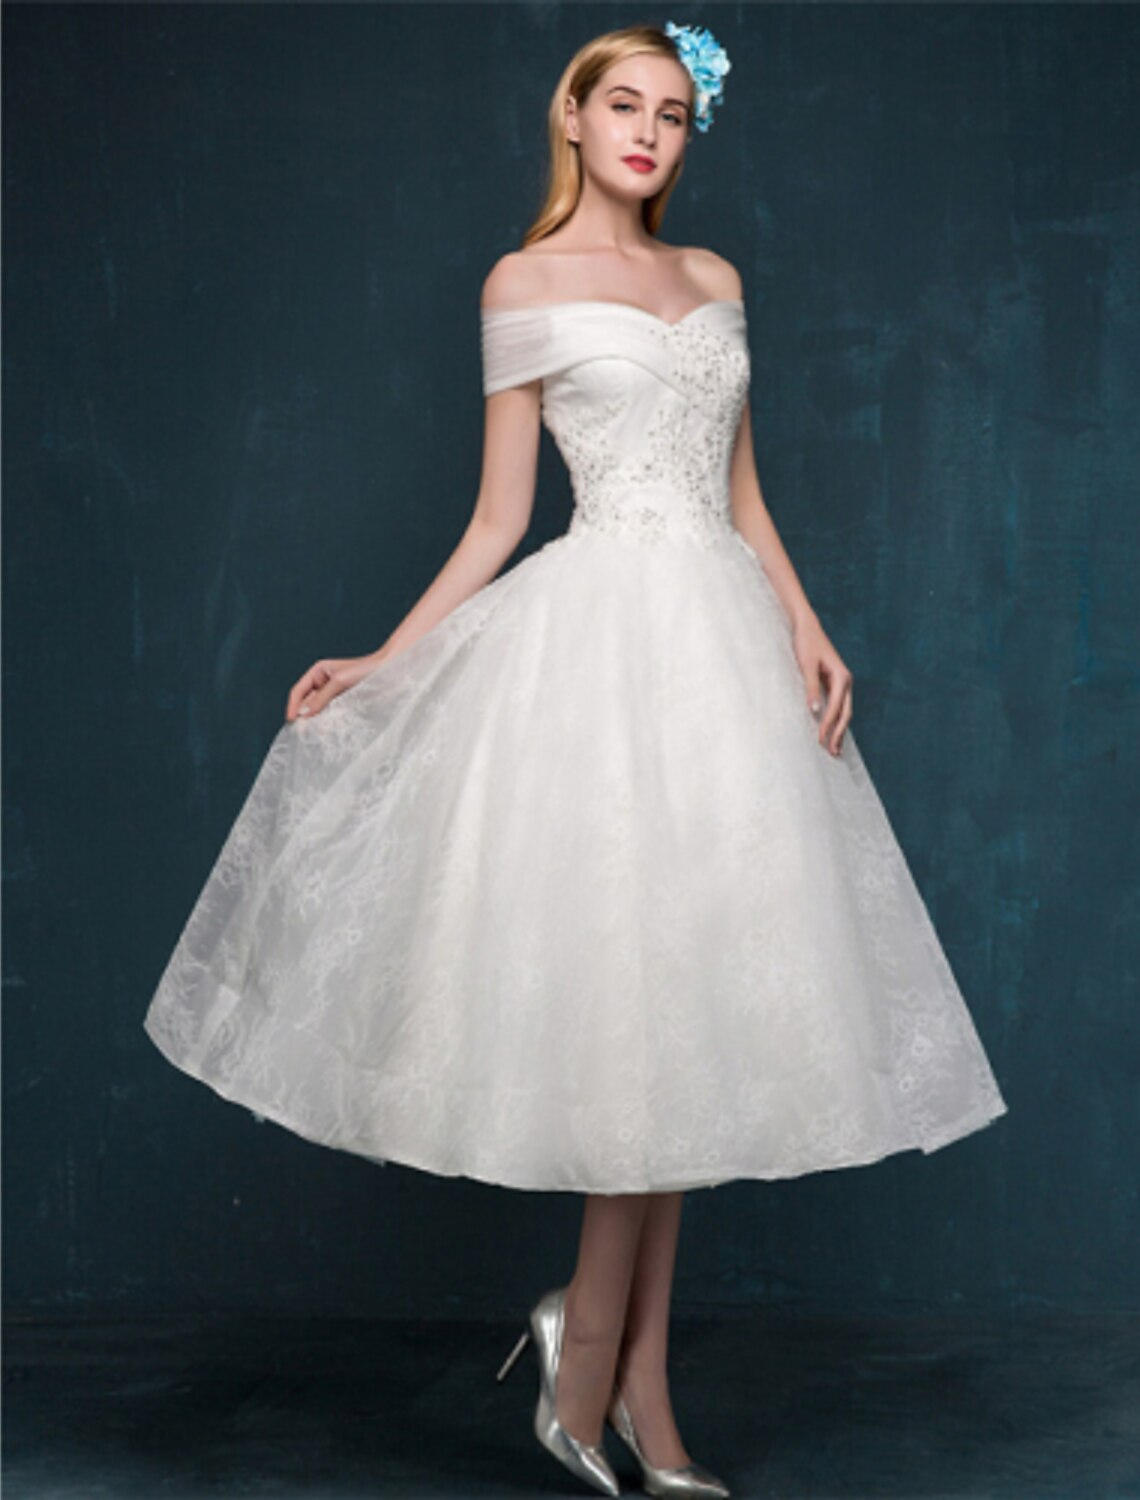 Little White Dresses Wedding Dresses Tea Length A-Line Short Sleeve Off Shoulder Beaded Lace With Beading Sequin